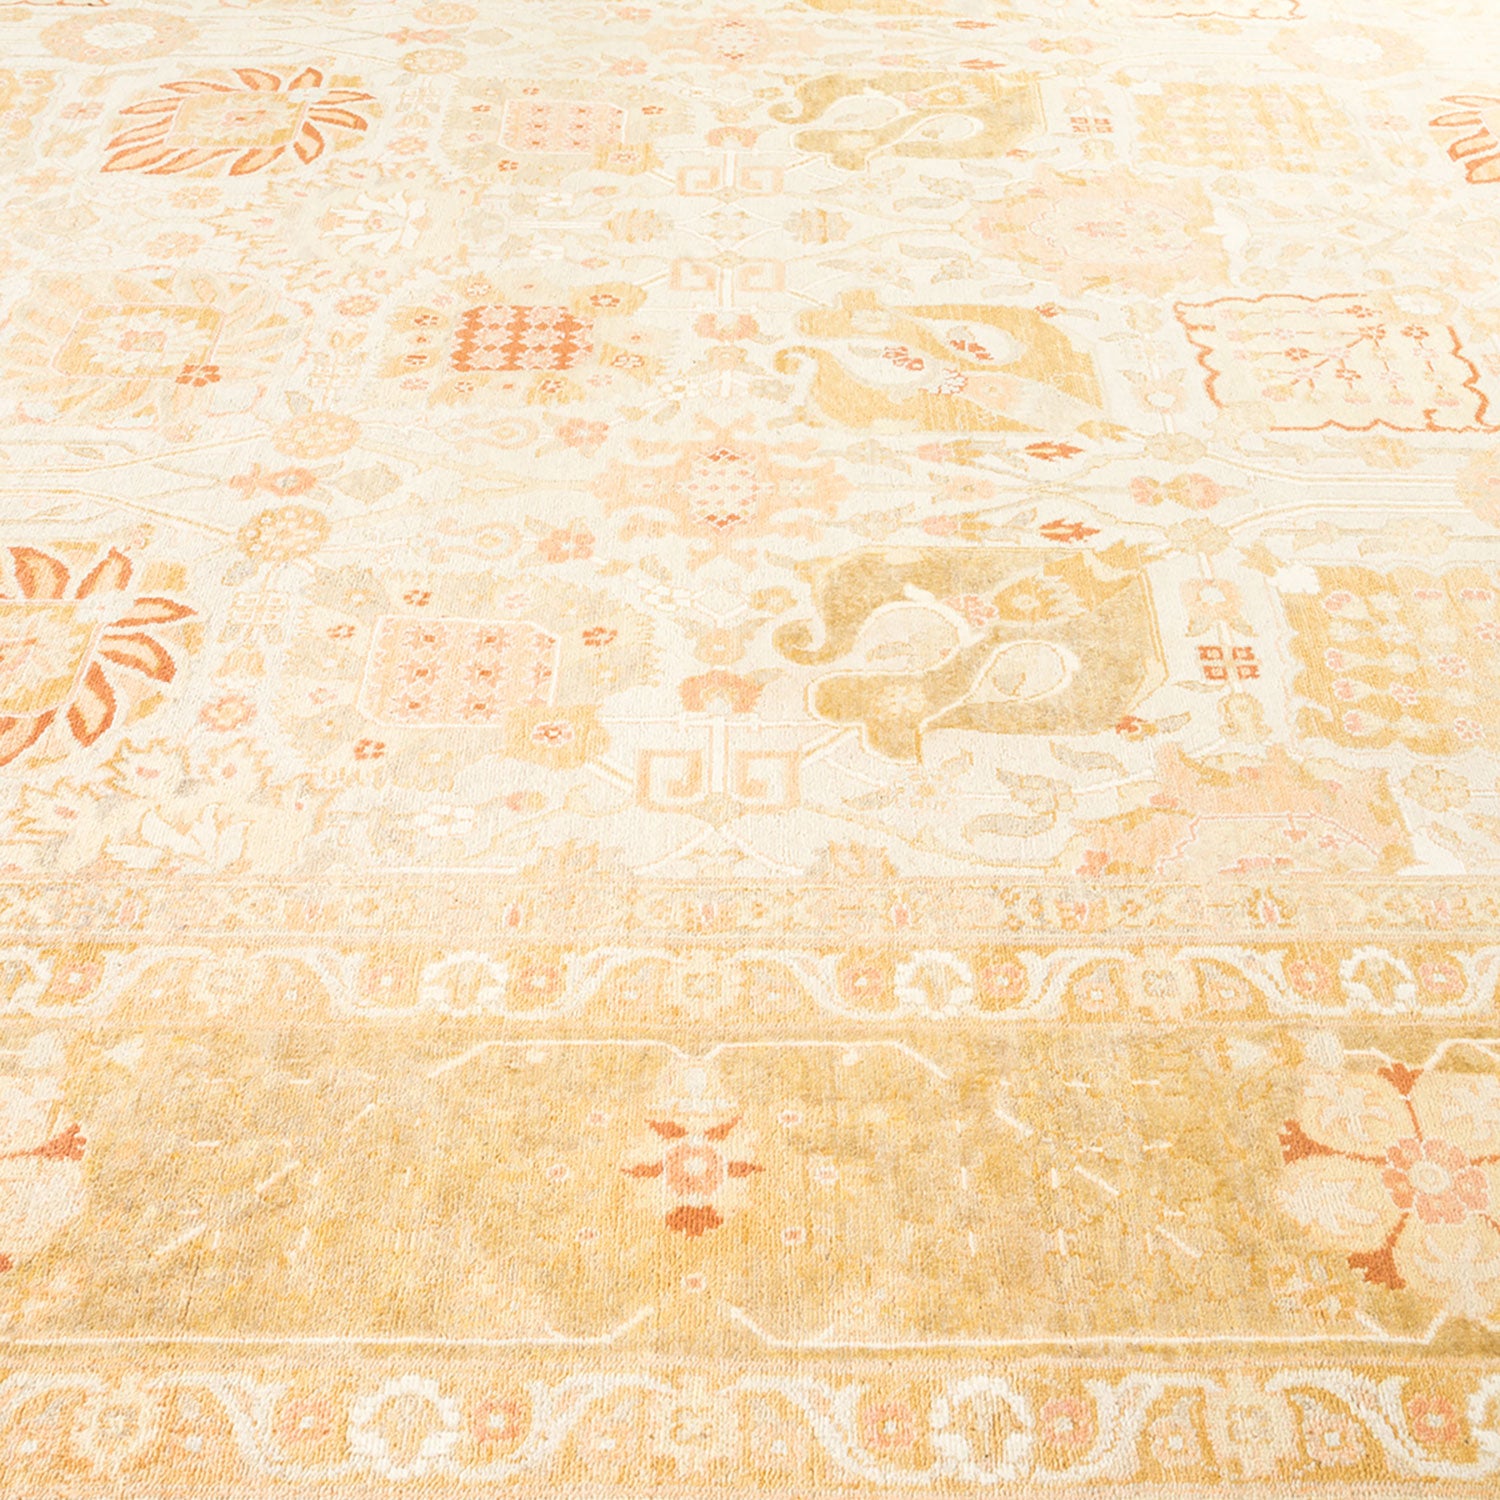 Close-up view of a intricately designed beige and orange carpet.